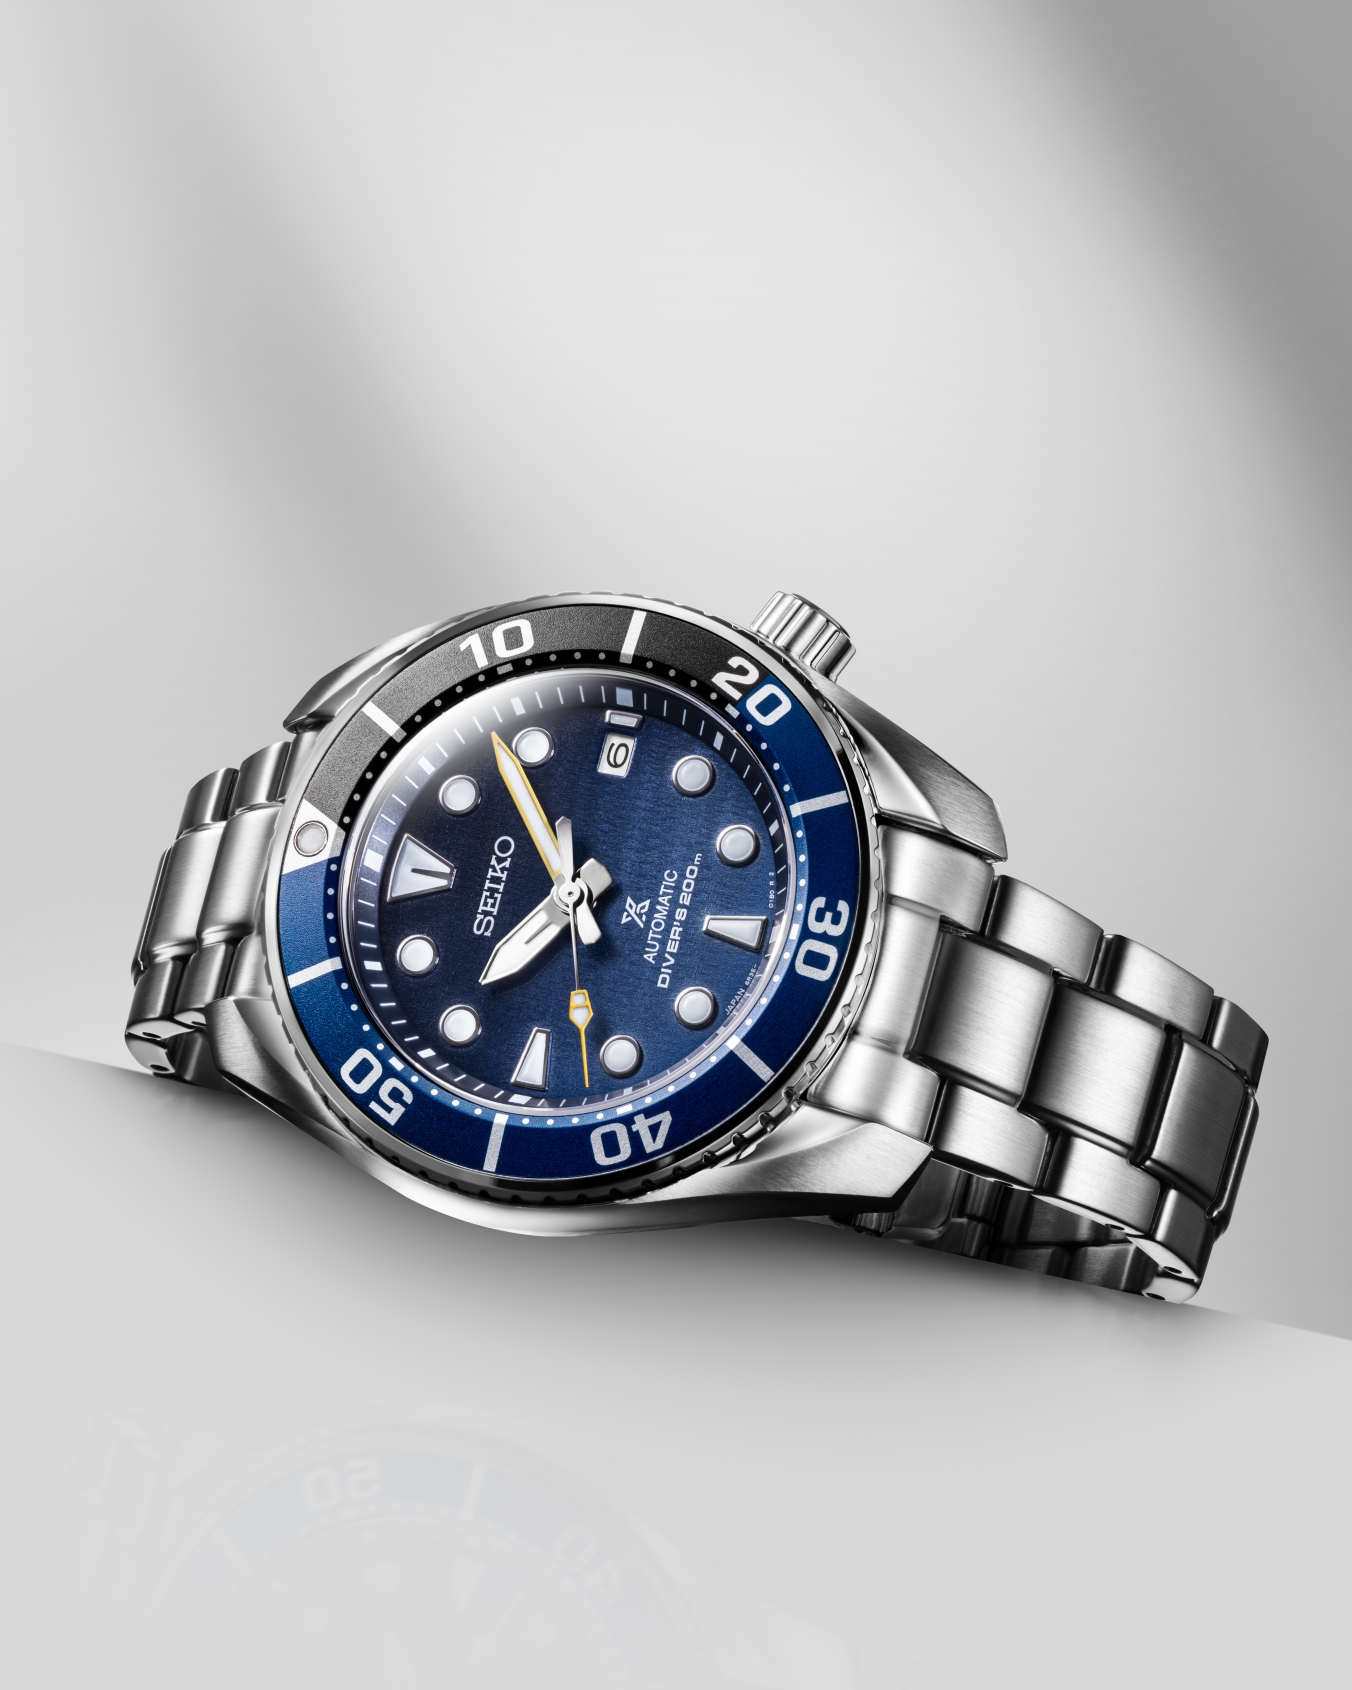 Seiko Just Dropped Two Limited-Edition Australia-Only Dive Watches